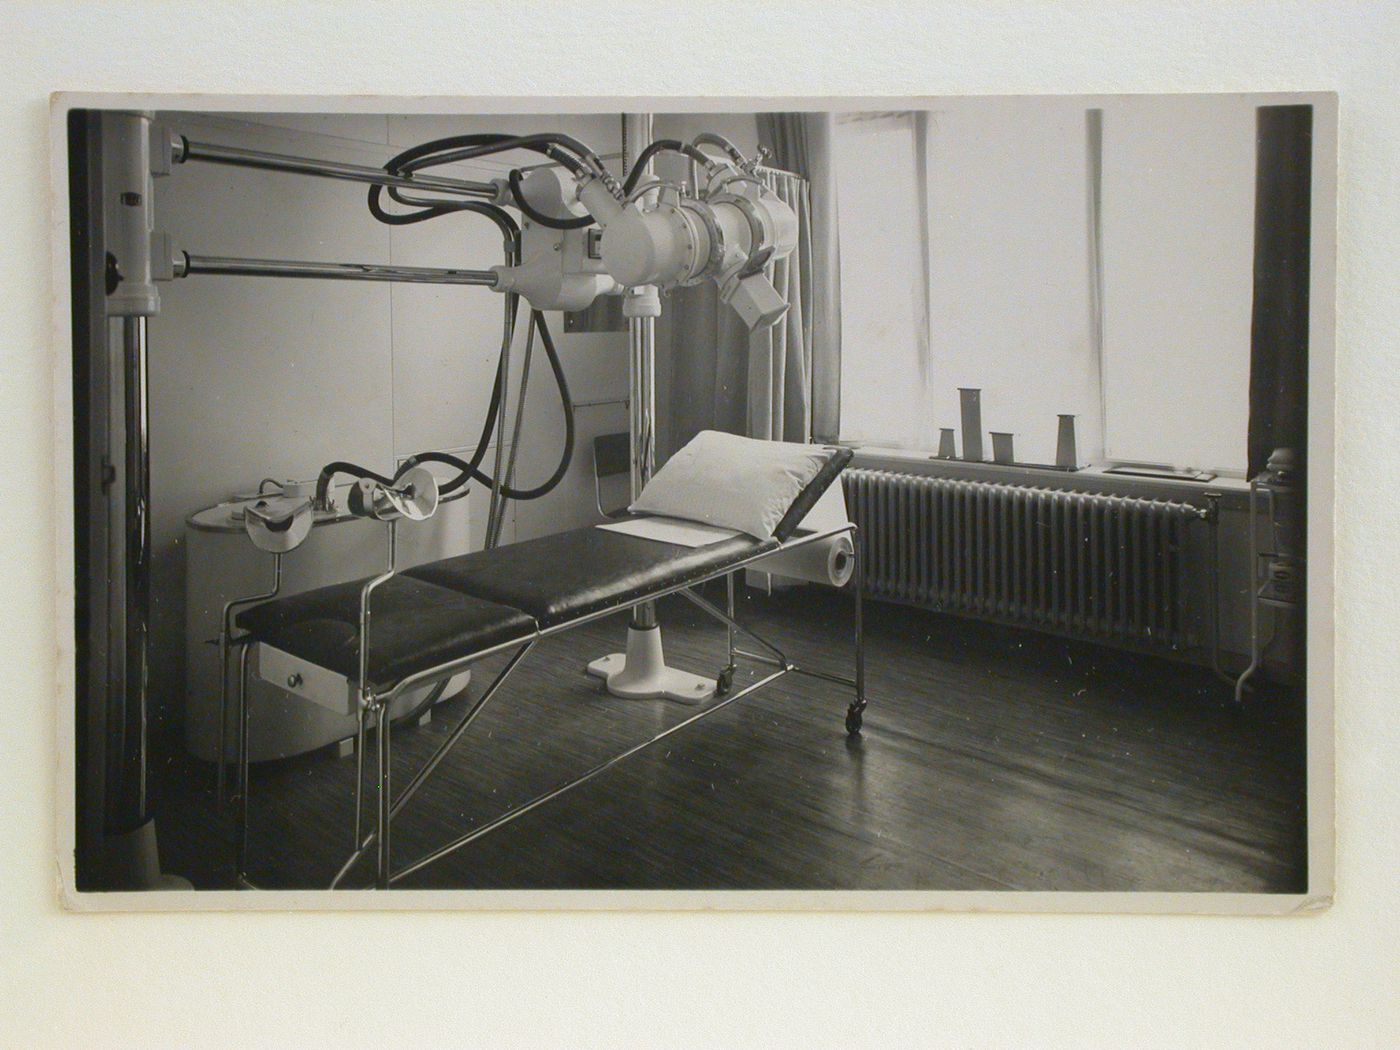 The Diaconessen - inrichting extension, X-ray therapy room with machine and bed, Rotterdam, Netherlands